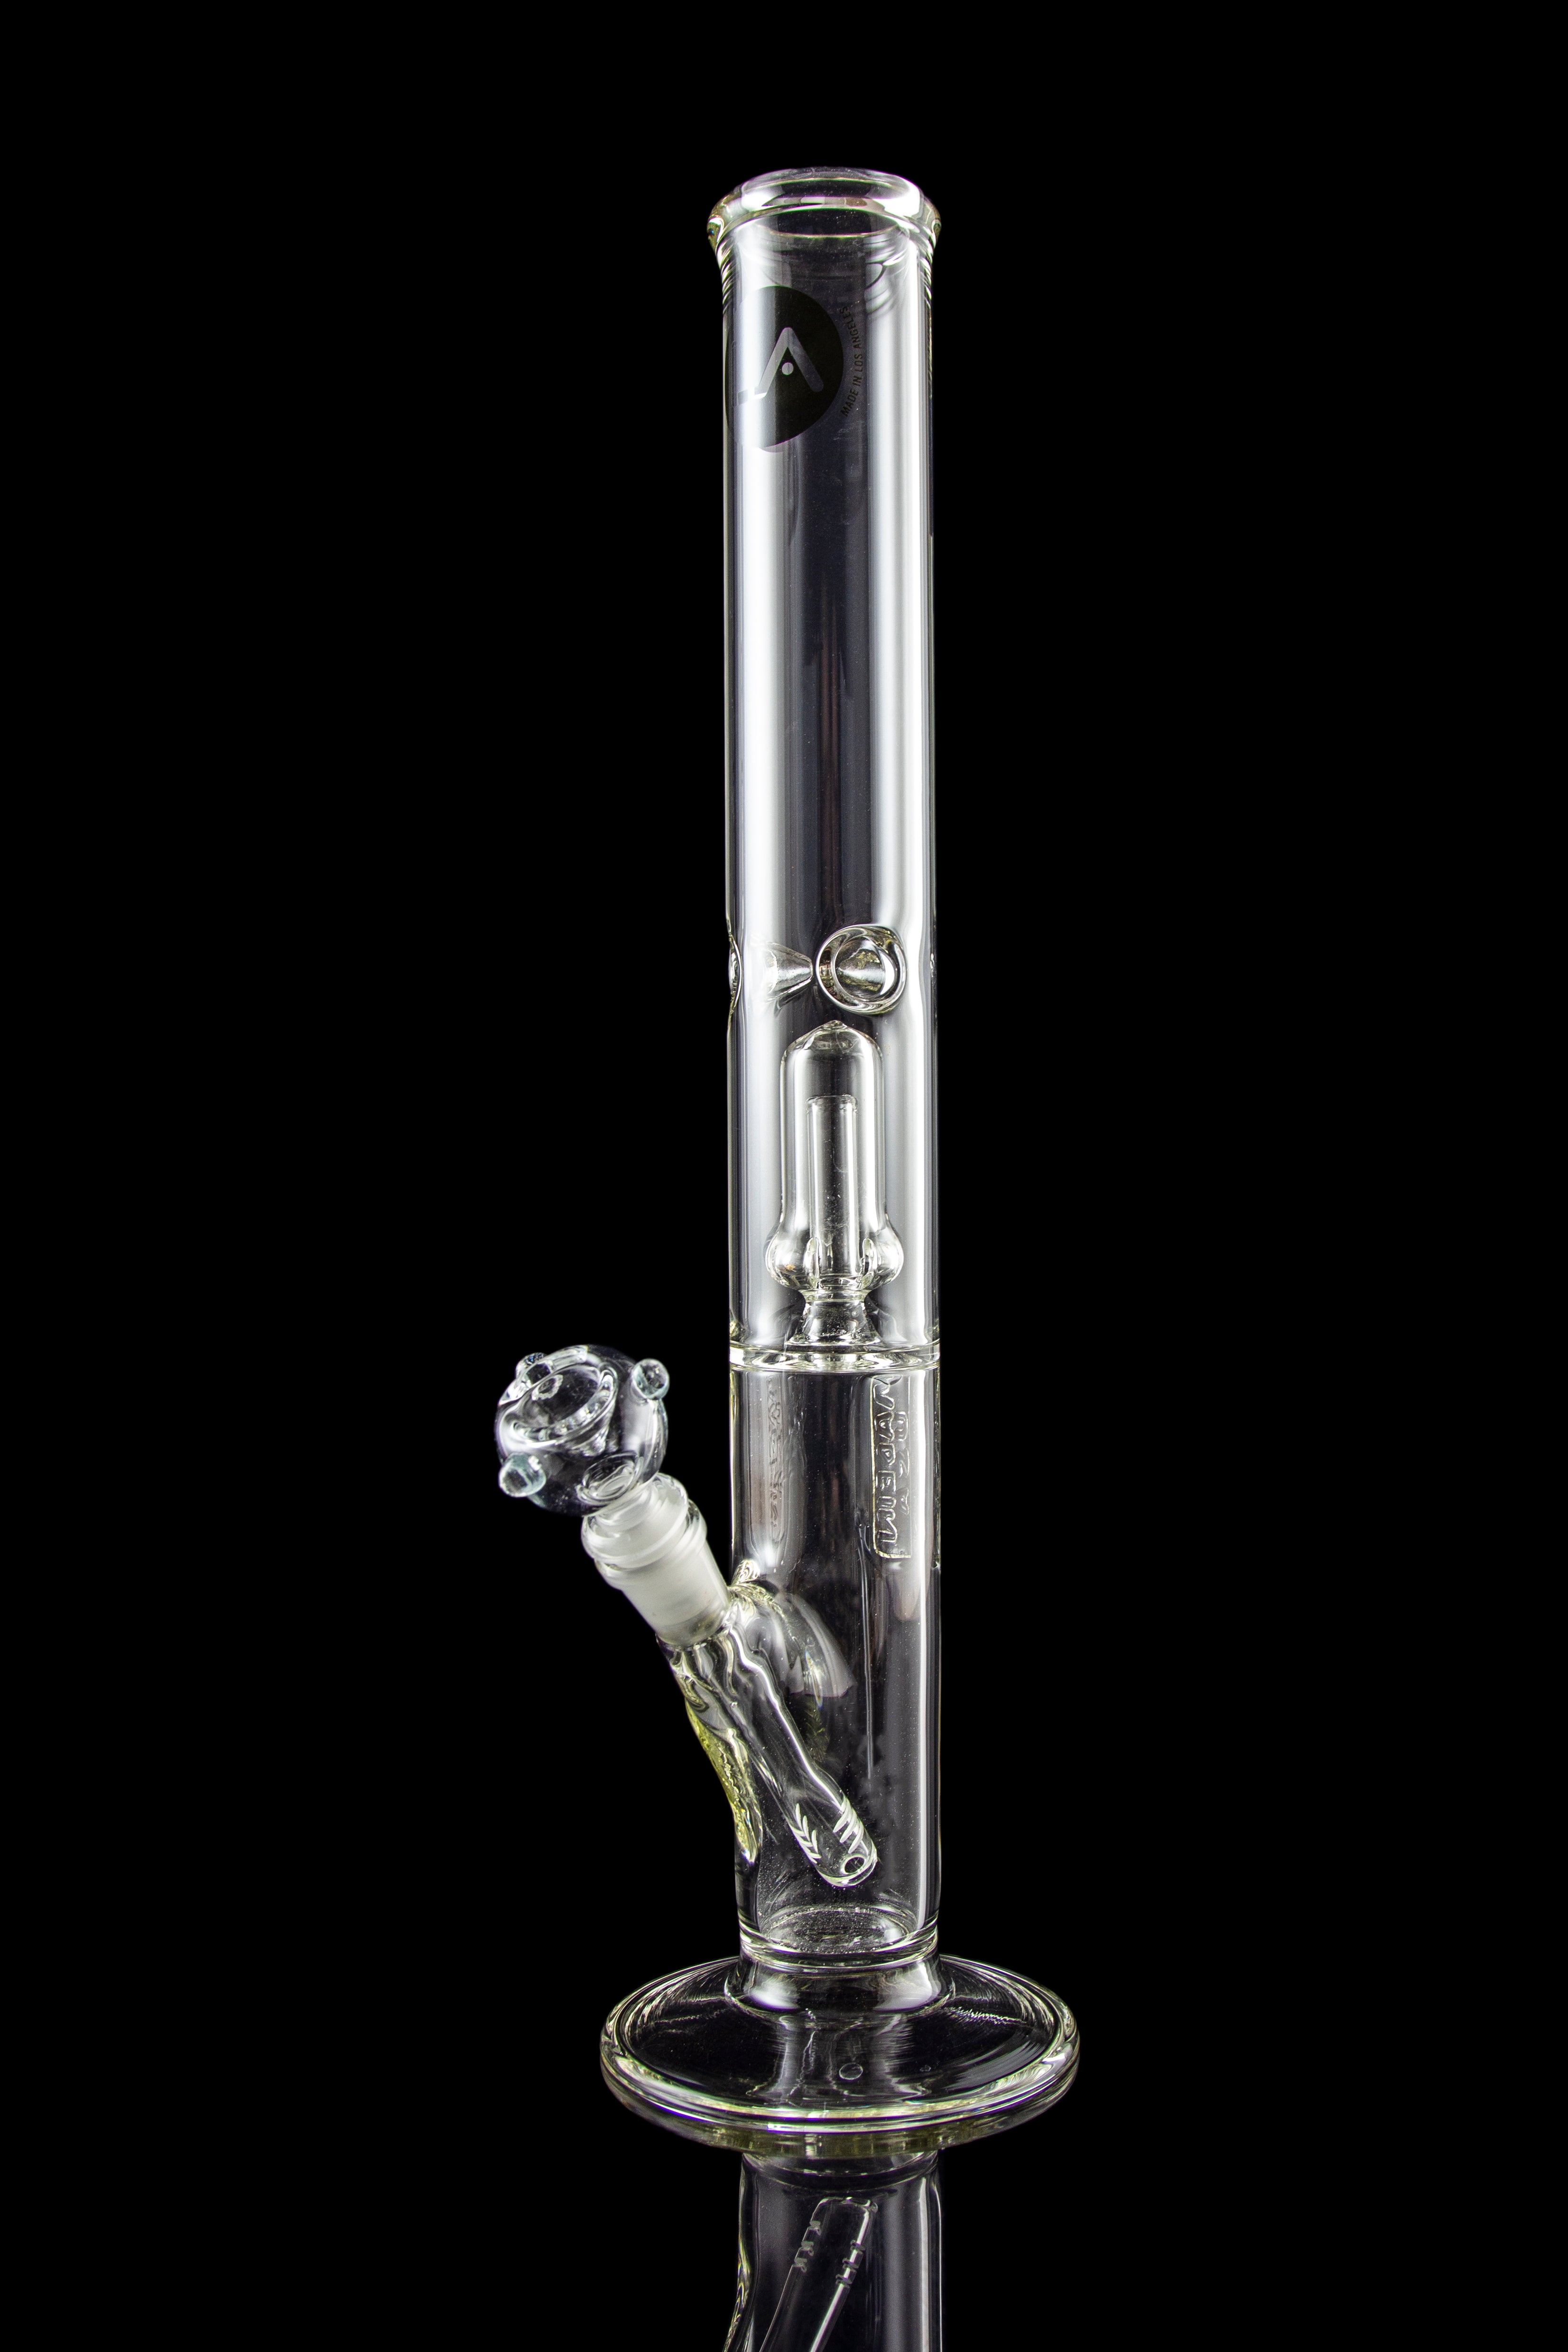 La Pipes Thick Glass Straight Tube Bong With Showerhead Perc - Available With Multiple Percs